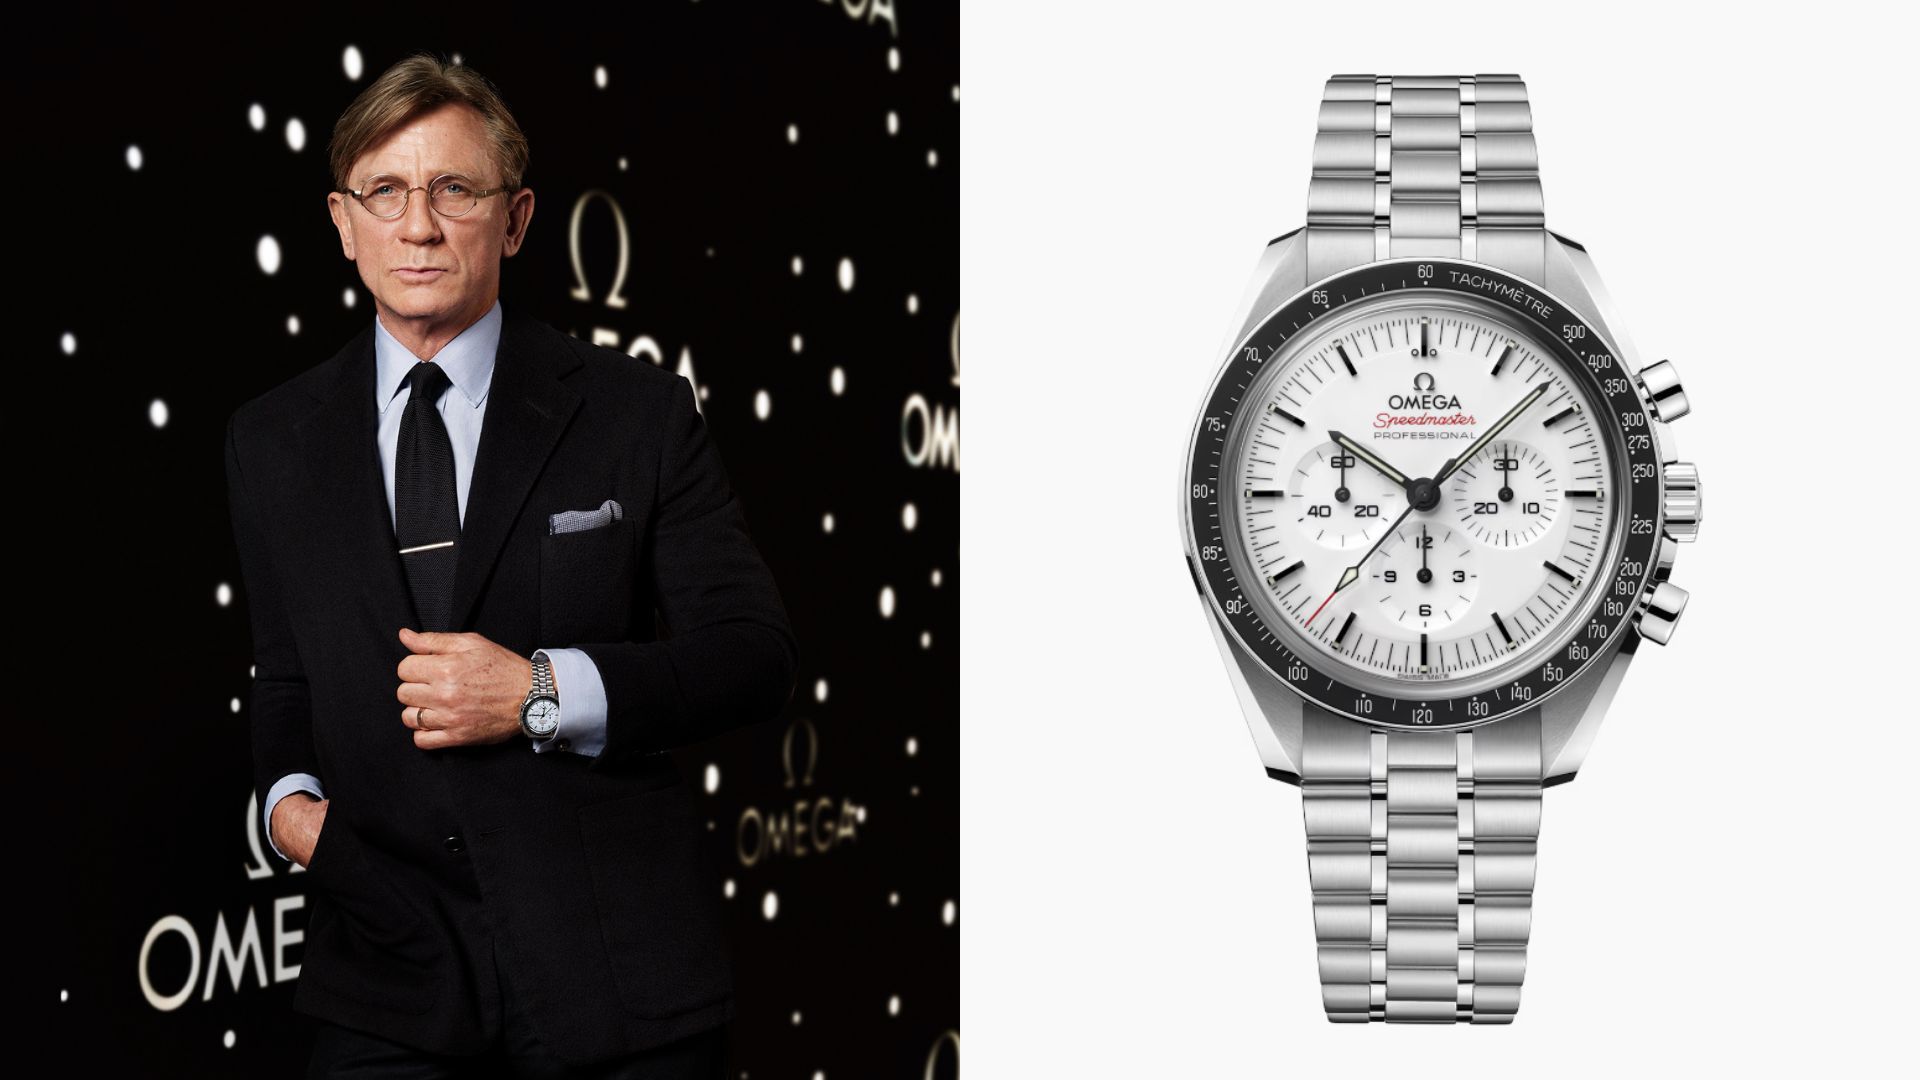 White Dial Omega Speedmaster Sported By Daniel Craig Released